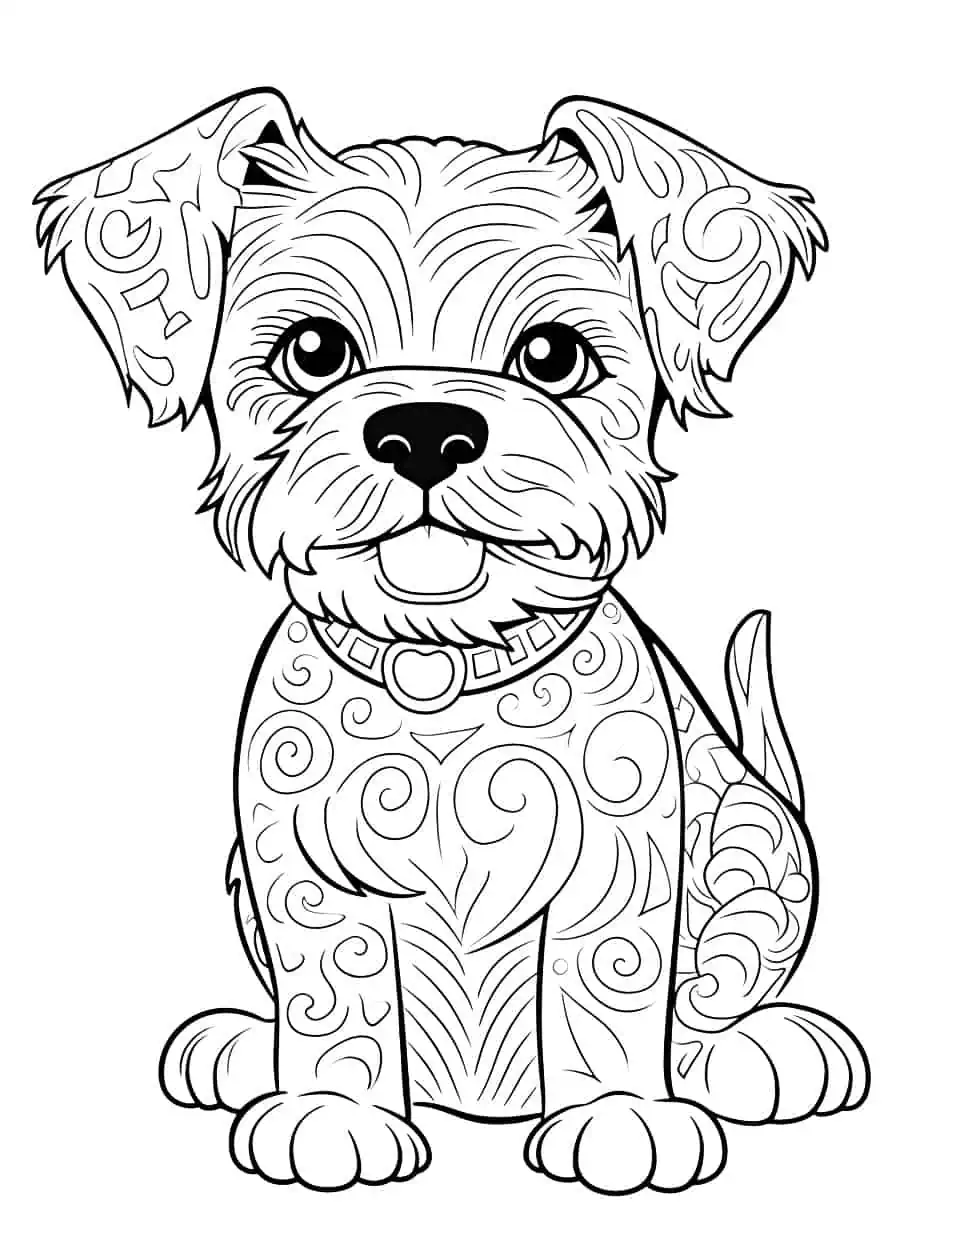 Mandala and Yorkie Mix Dog Coloring Page - A sophisticated Yorkie with a complex mandala design in the background.